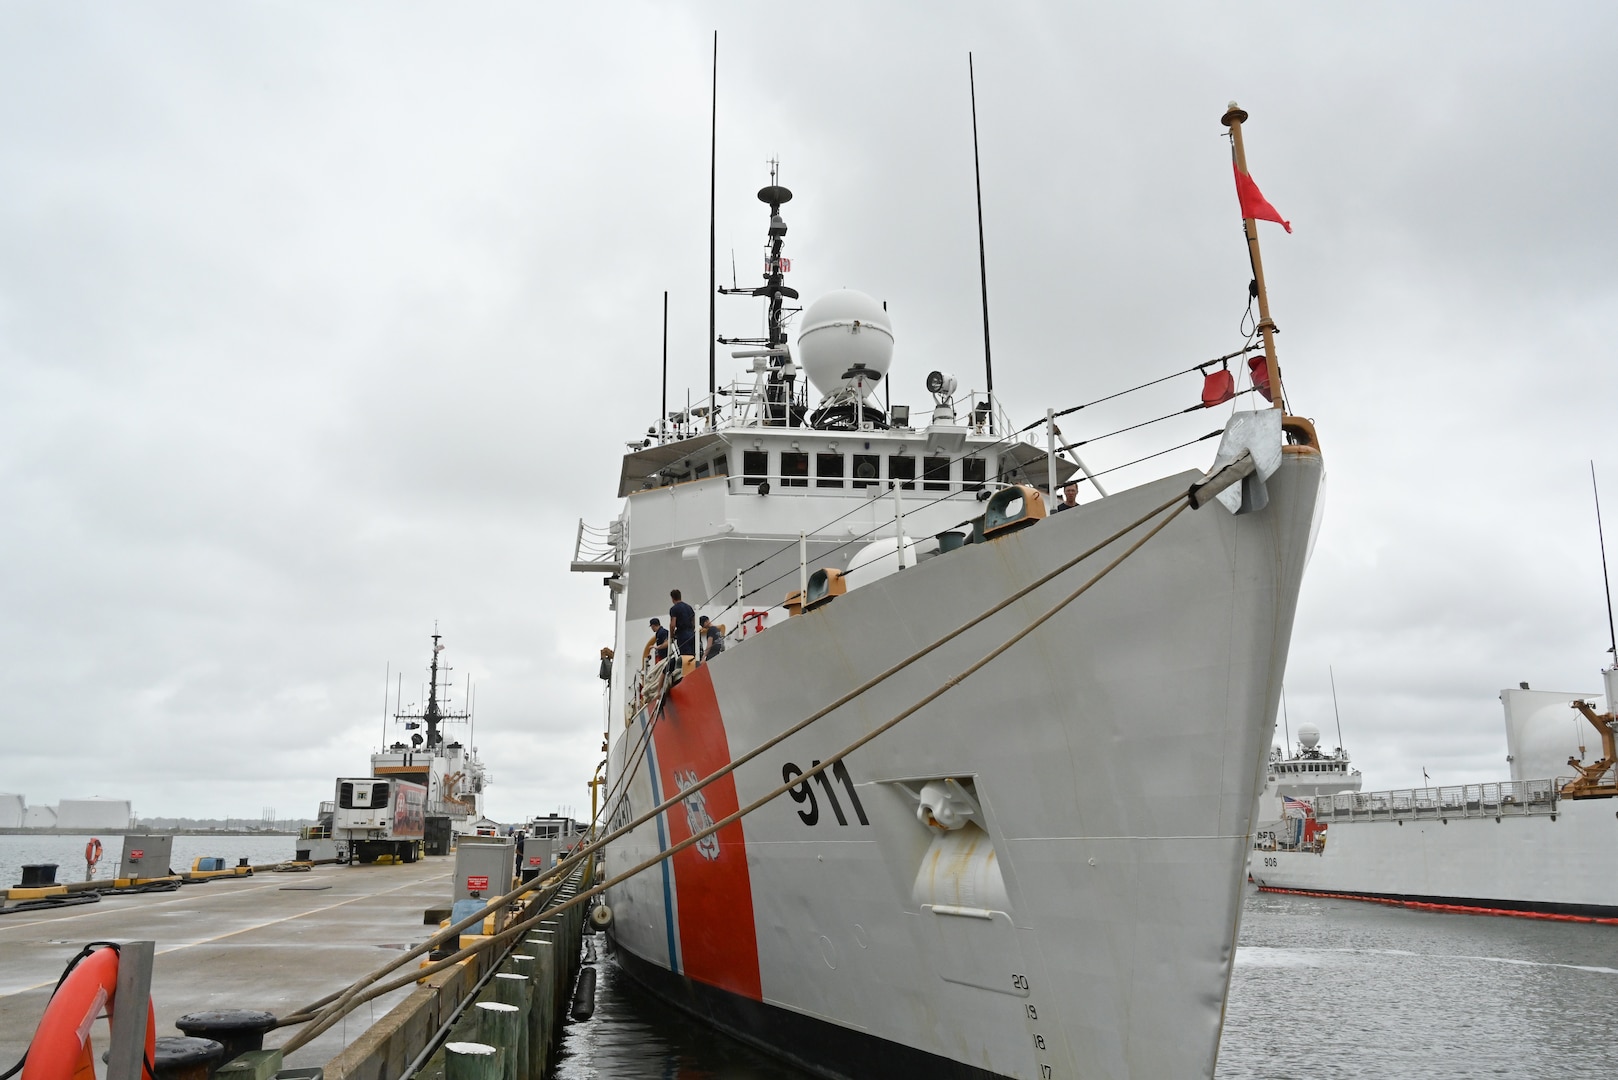 The crew of U.S. Coast Guard Cutter Forward (WMEC 911) moor to the pier, Sept. 26, in Portsmouth, Virginia. Forward completed a two-and-a-half month-long patrol in the North Atlantic Ocean to support the Coast Guard Arctic Strategy and participate in the Canadian Armed Forces-led Operation Nanook 2023, an annual military exercise conducted to strengthen shared maritime objectives in the high northern latitudes. (U.S. Coast Guard photo by Petty Officer 2nd Class Brandon Hillard)